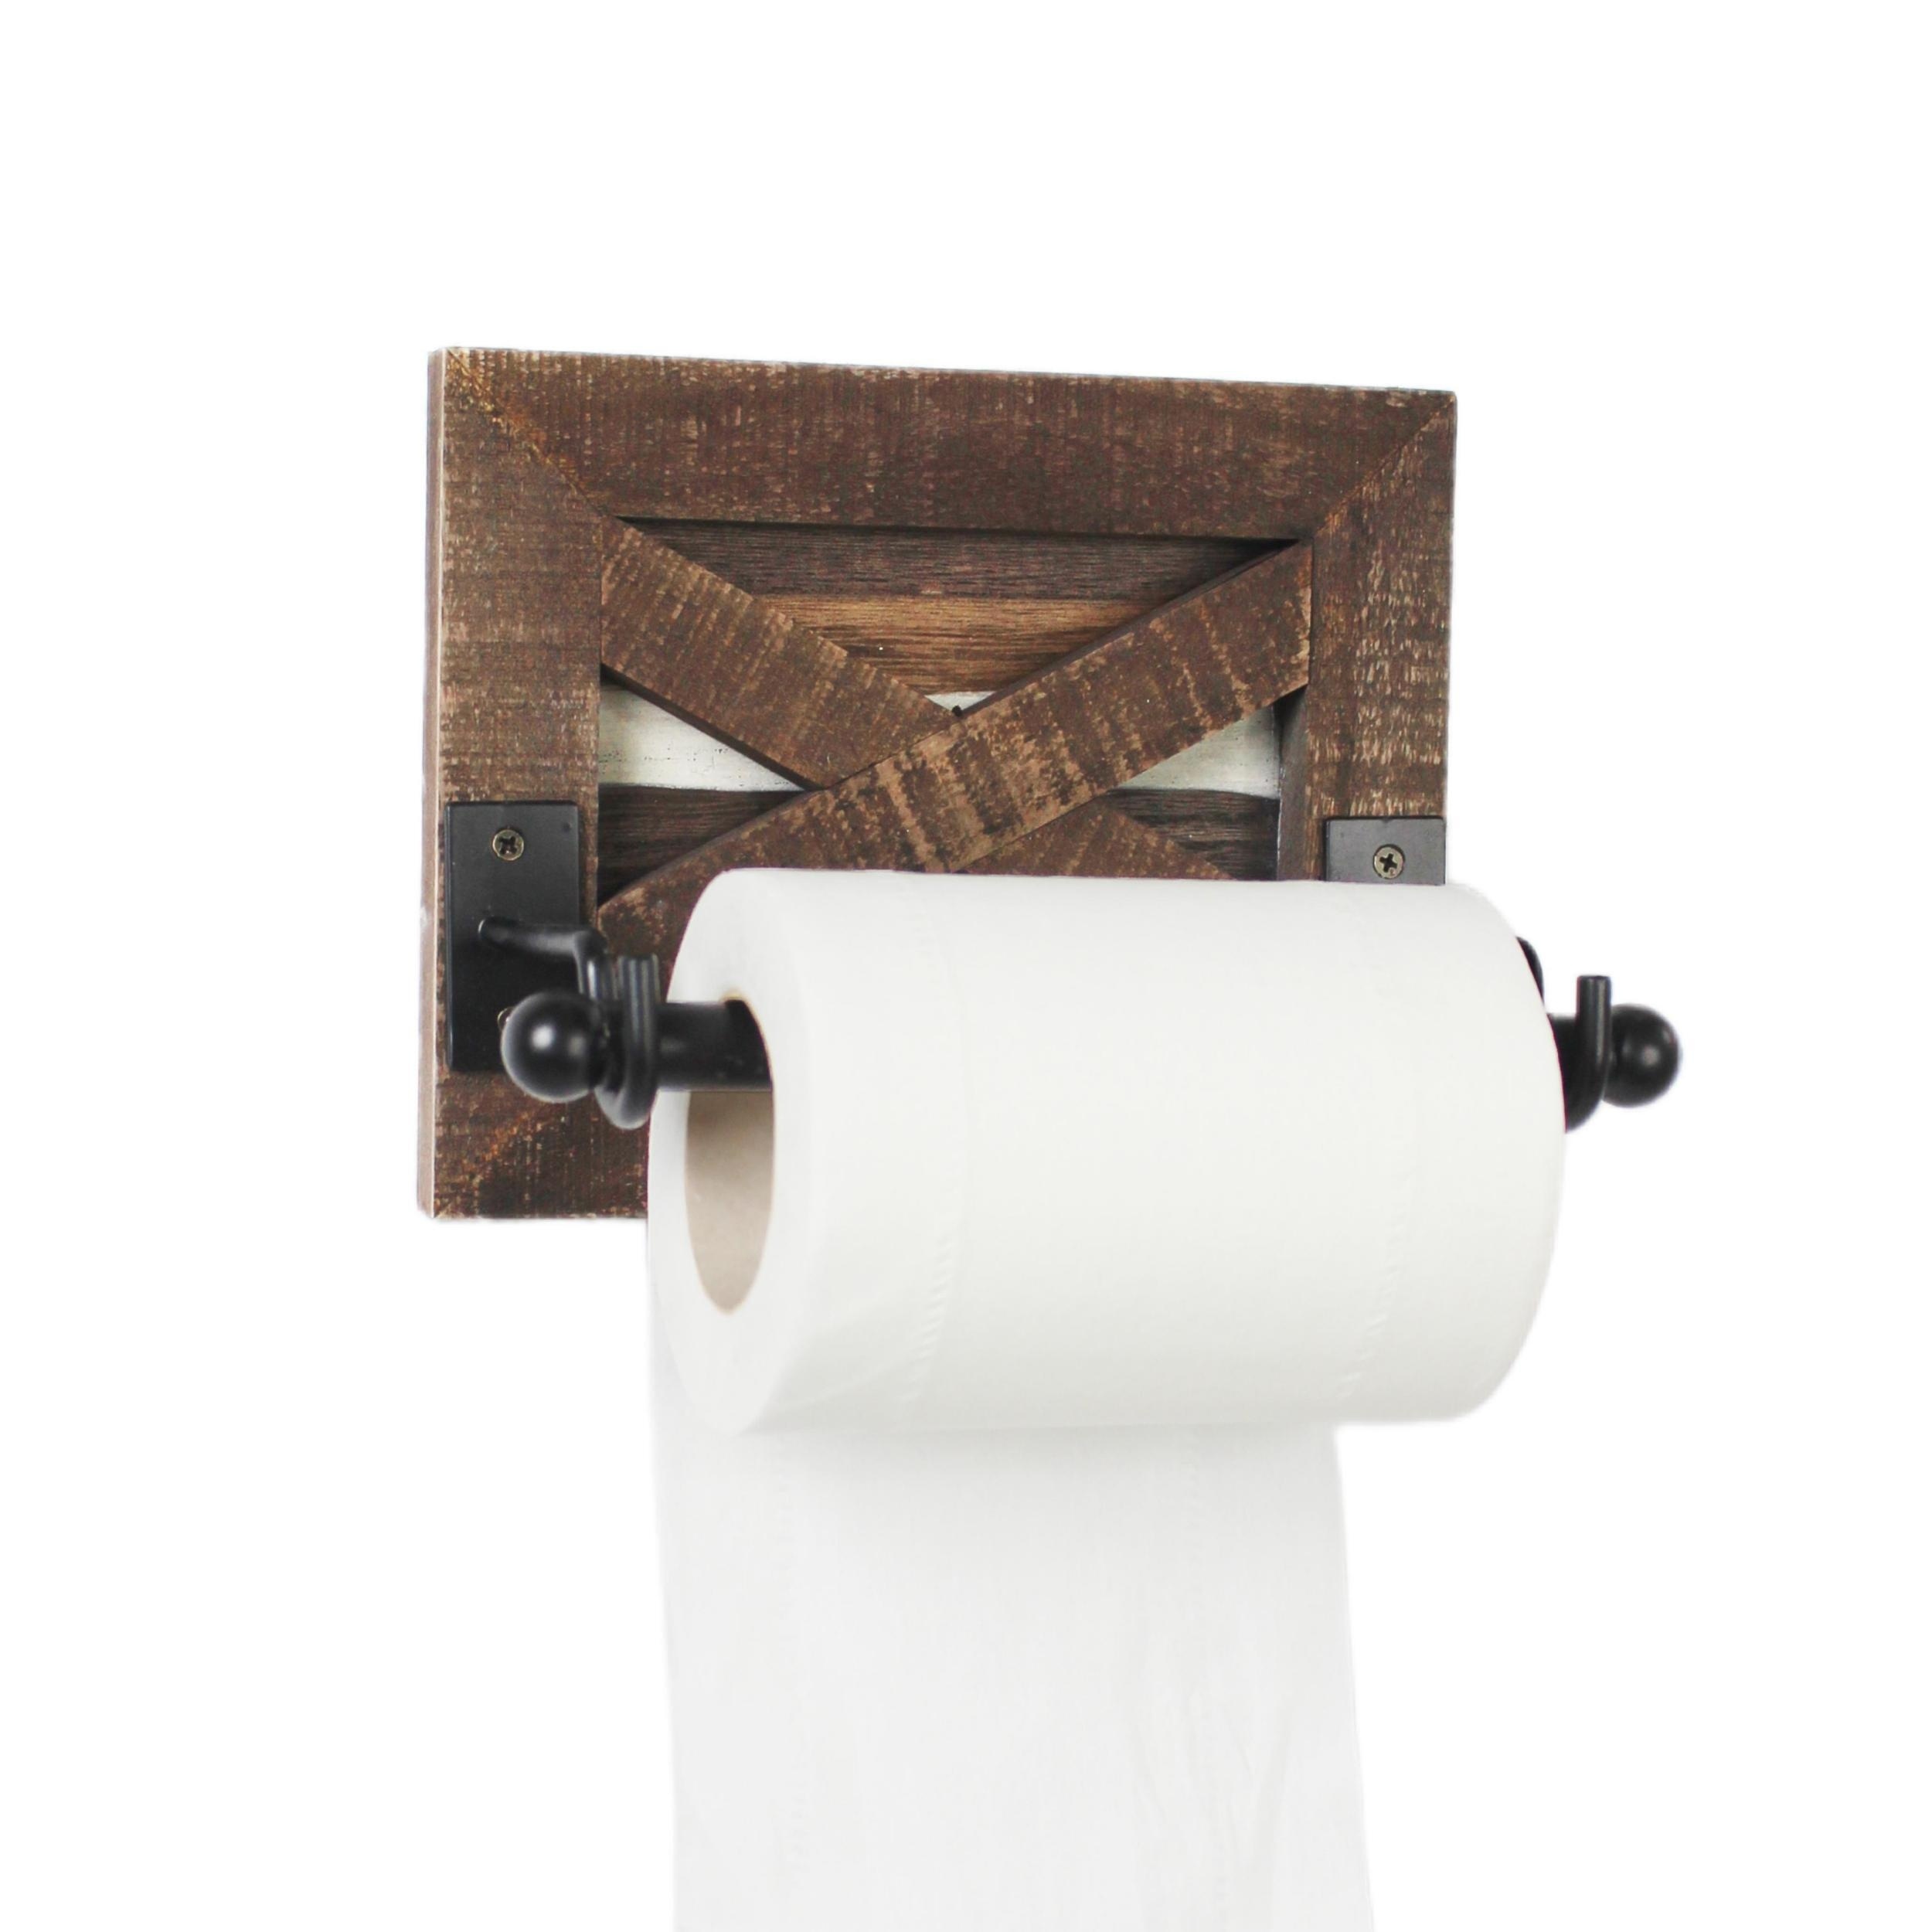 

1pc Farmhouse Toilet Paper Holder For Bathroom, Rustic Wood Wall Mount Toilet Roll Paper Holder, Toilet Bathroom Accessories, Bathroom Decor